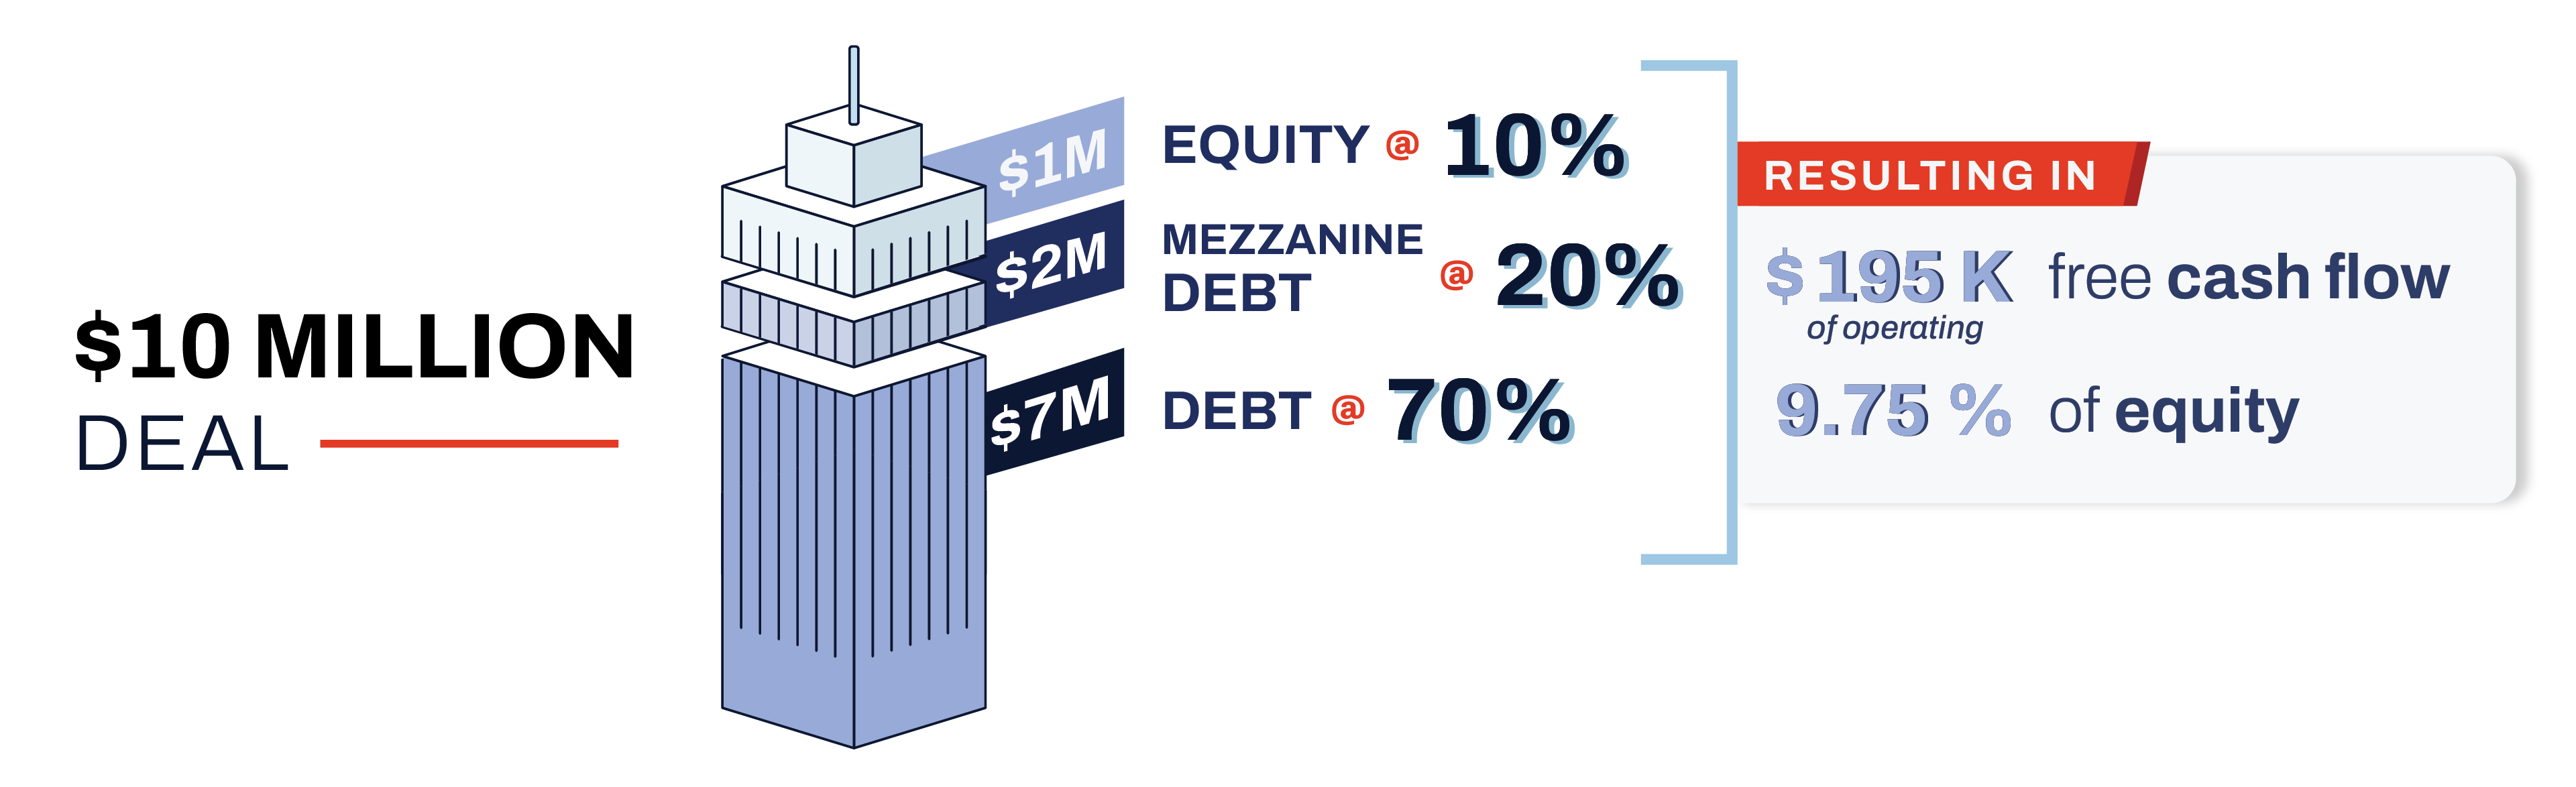 Table illustrating a deal financed by 70% debt, 20% equity, and 10% mezzanine debt Alt text: A table illustrating ROE in a $10M deal financed by $7M debt (70%), $2M equity (20%), $1M mezzanine debt (10%), net operating income of $800k, debt service payments of $525k, mezzanine debt service of $80k, resulting in $195k of operating free cash flow and 9.75% equity.